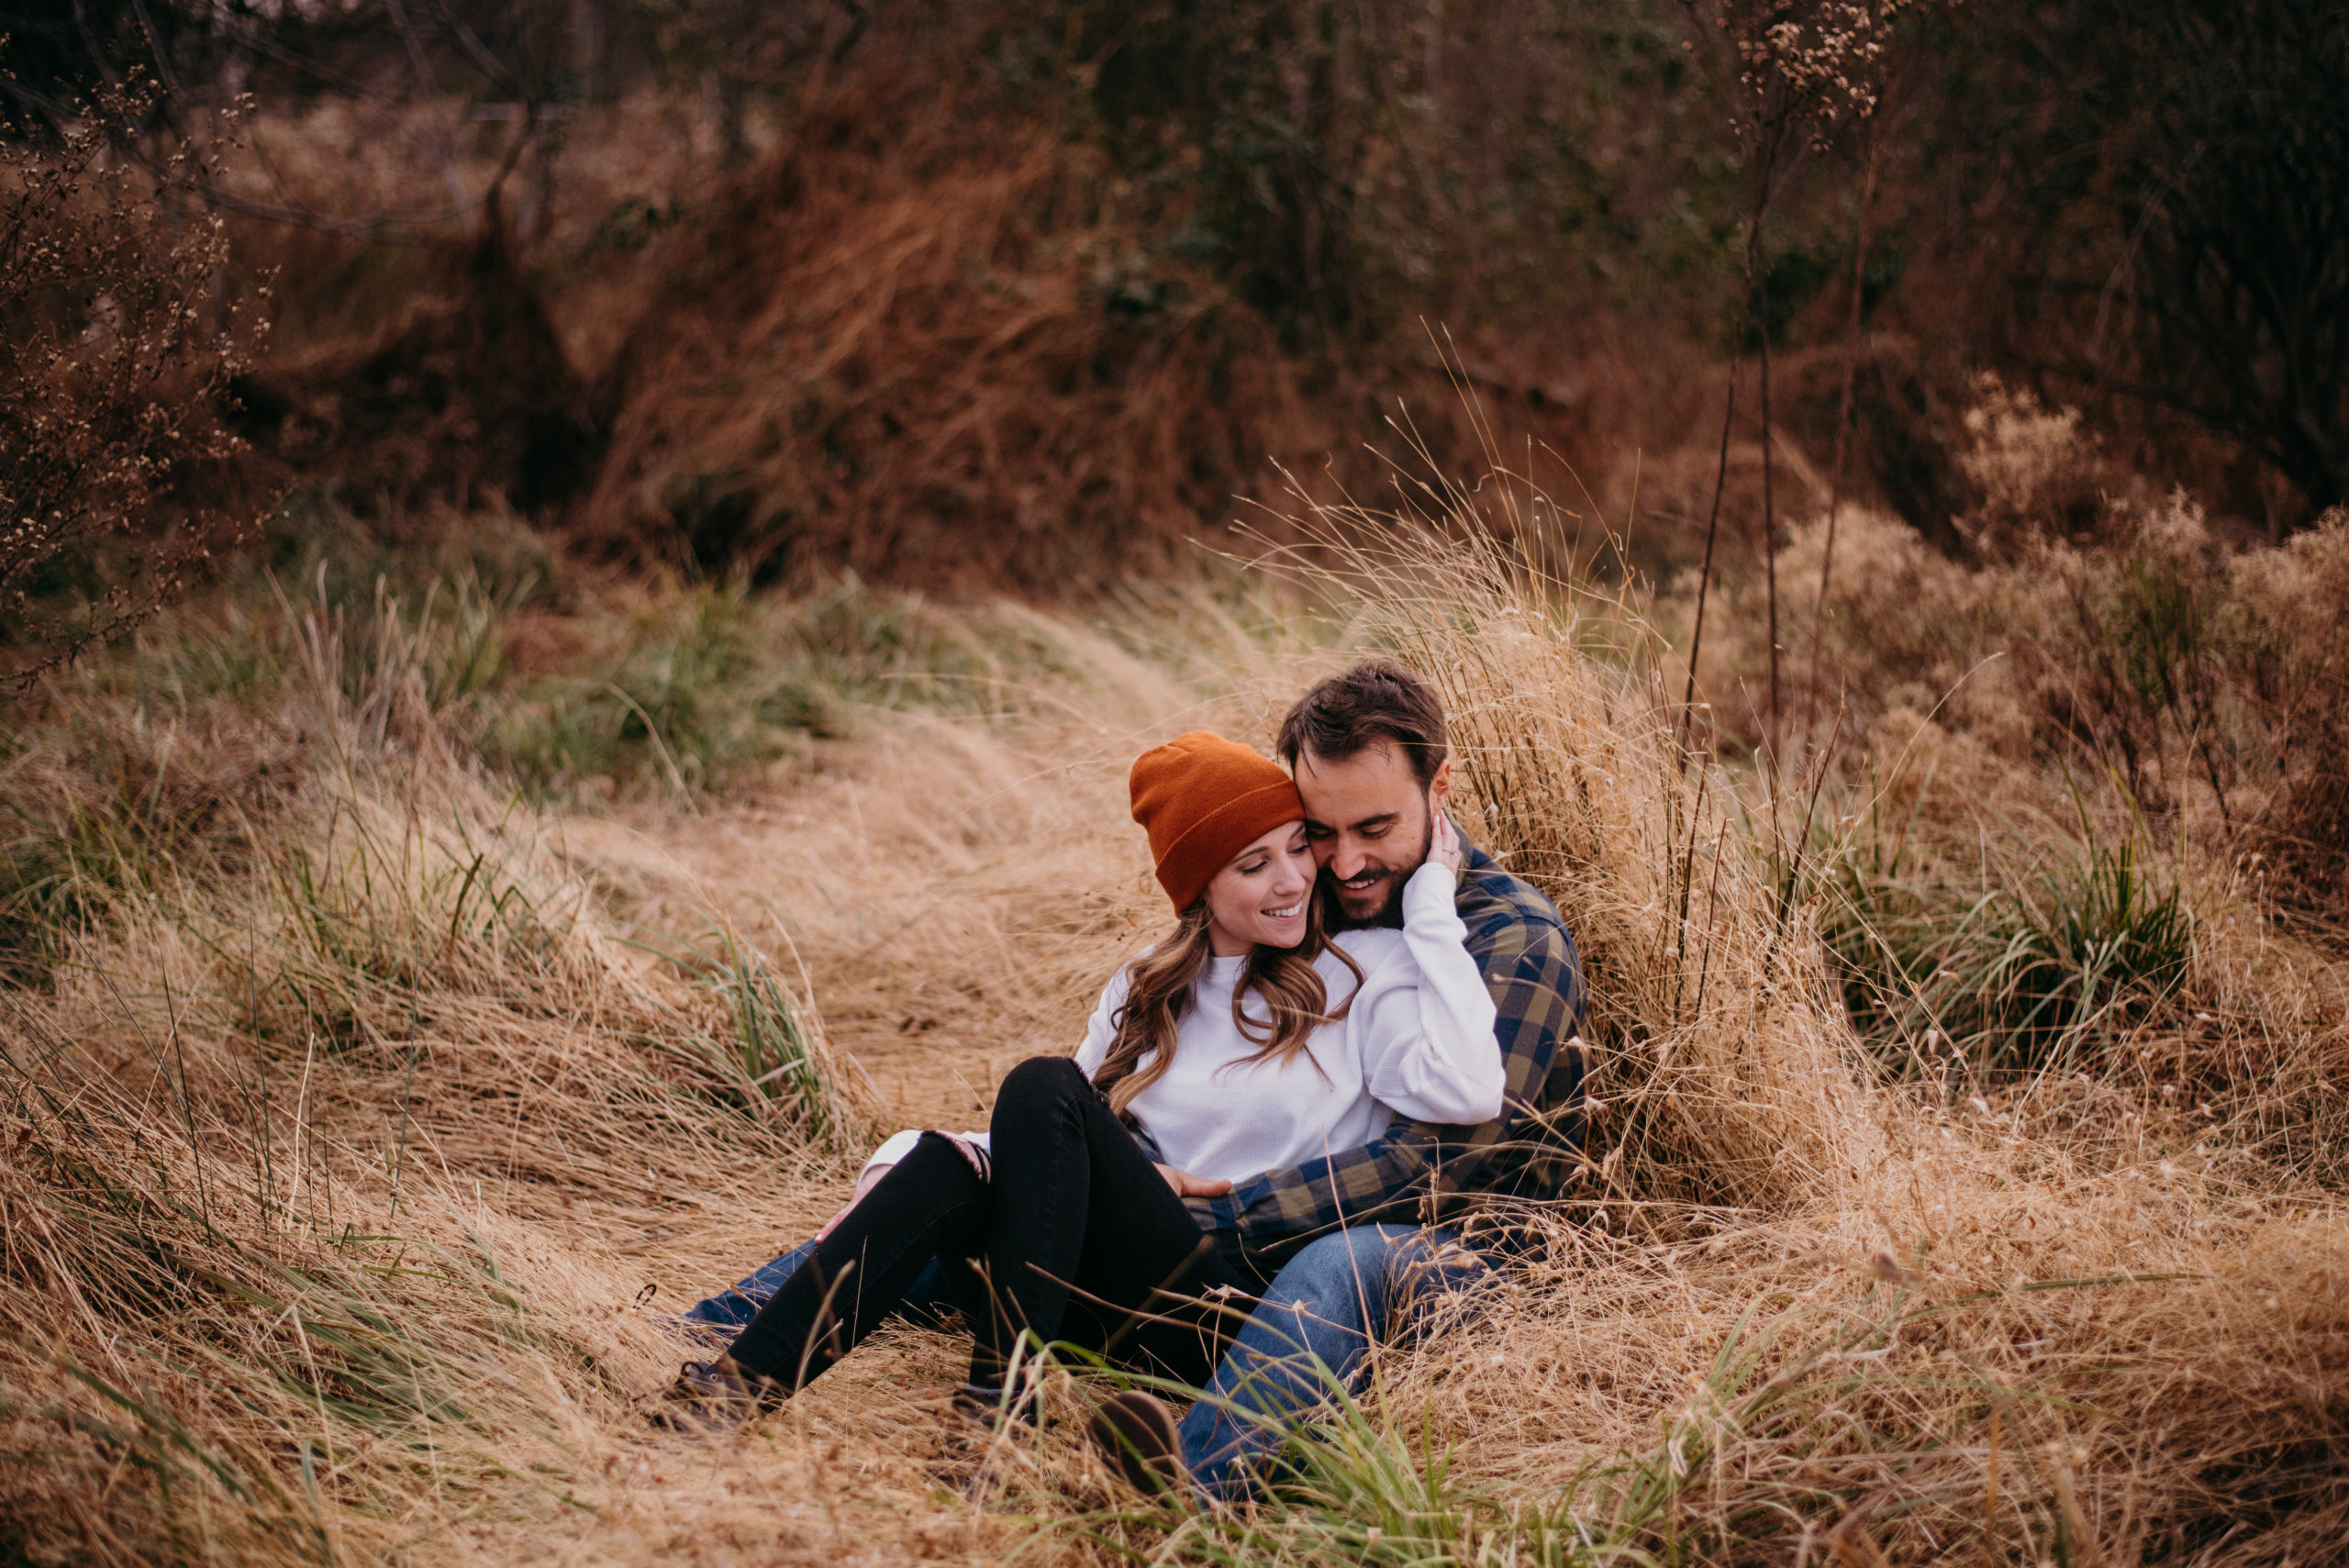 A cozy outdoor engagement photo of a couple sitting together in a grassy field, the woman wearing a brown beanie and white sweater, leaning into the man who is wearing a plaid shirt.